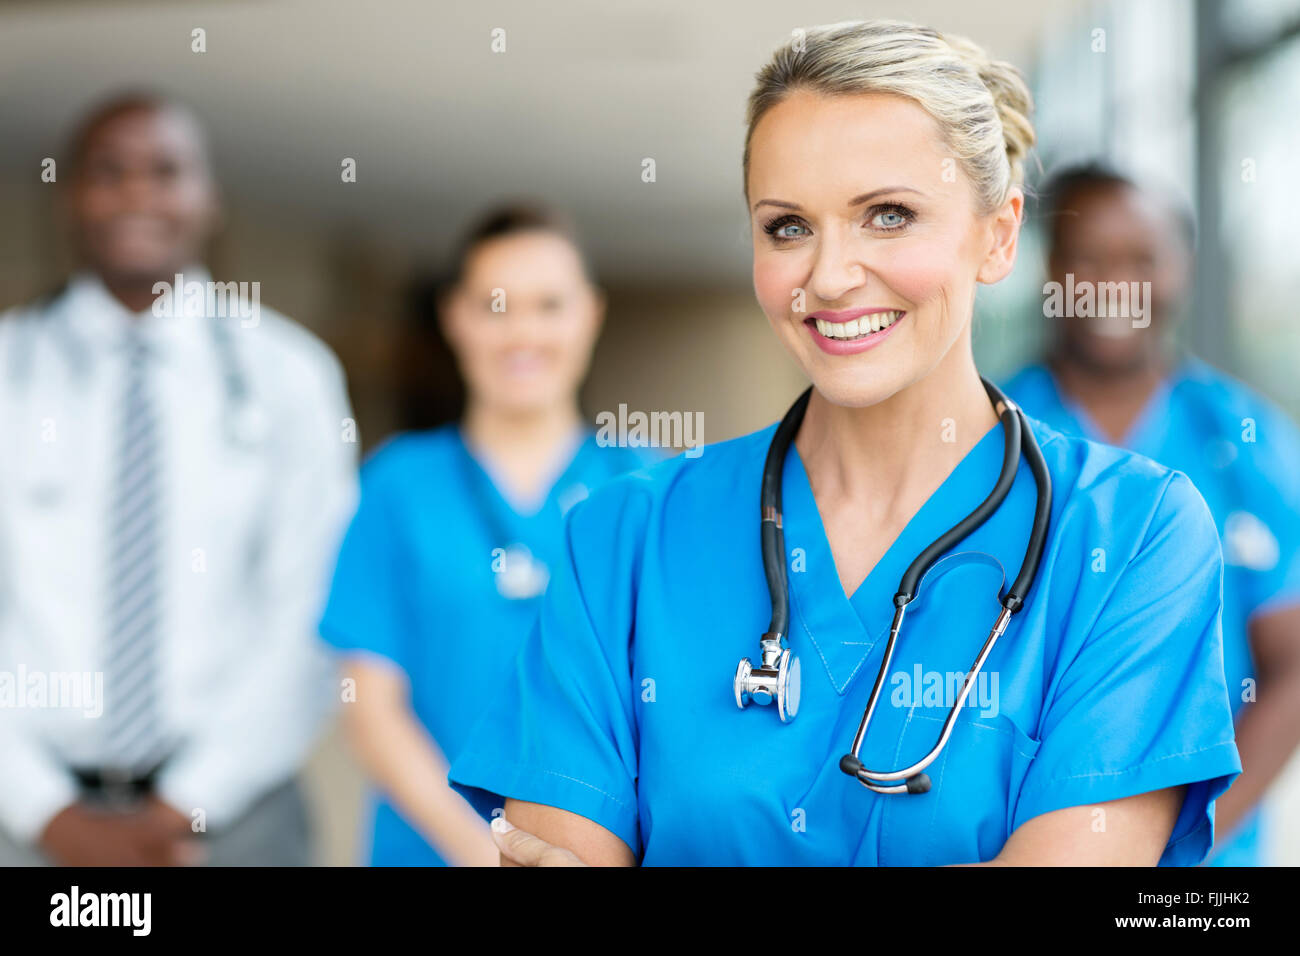 group of medical workers in hospital Stock Photo